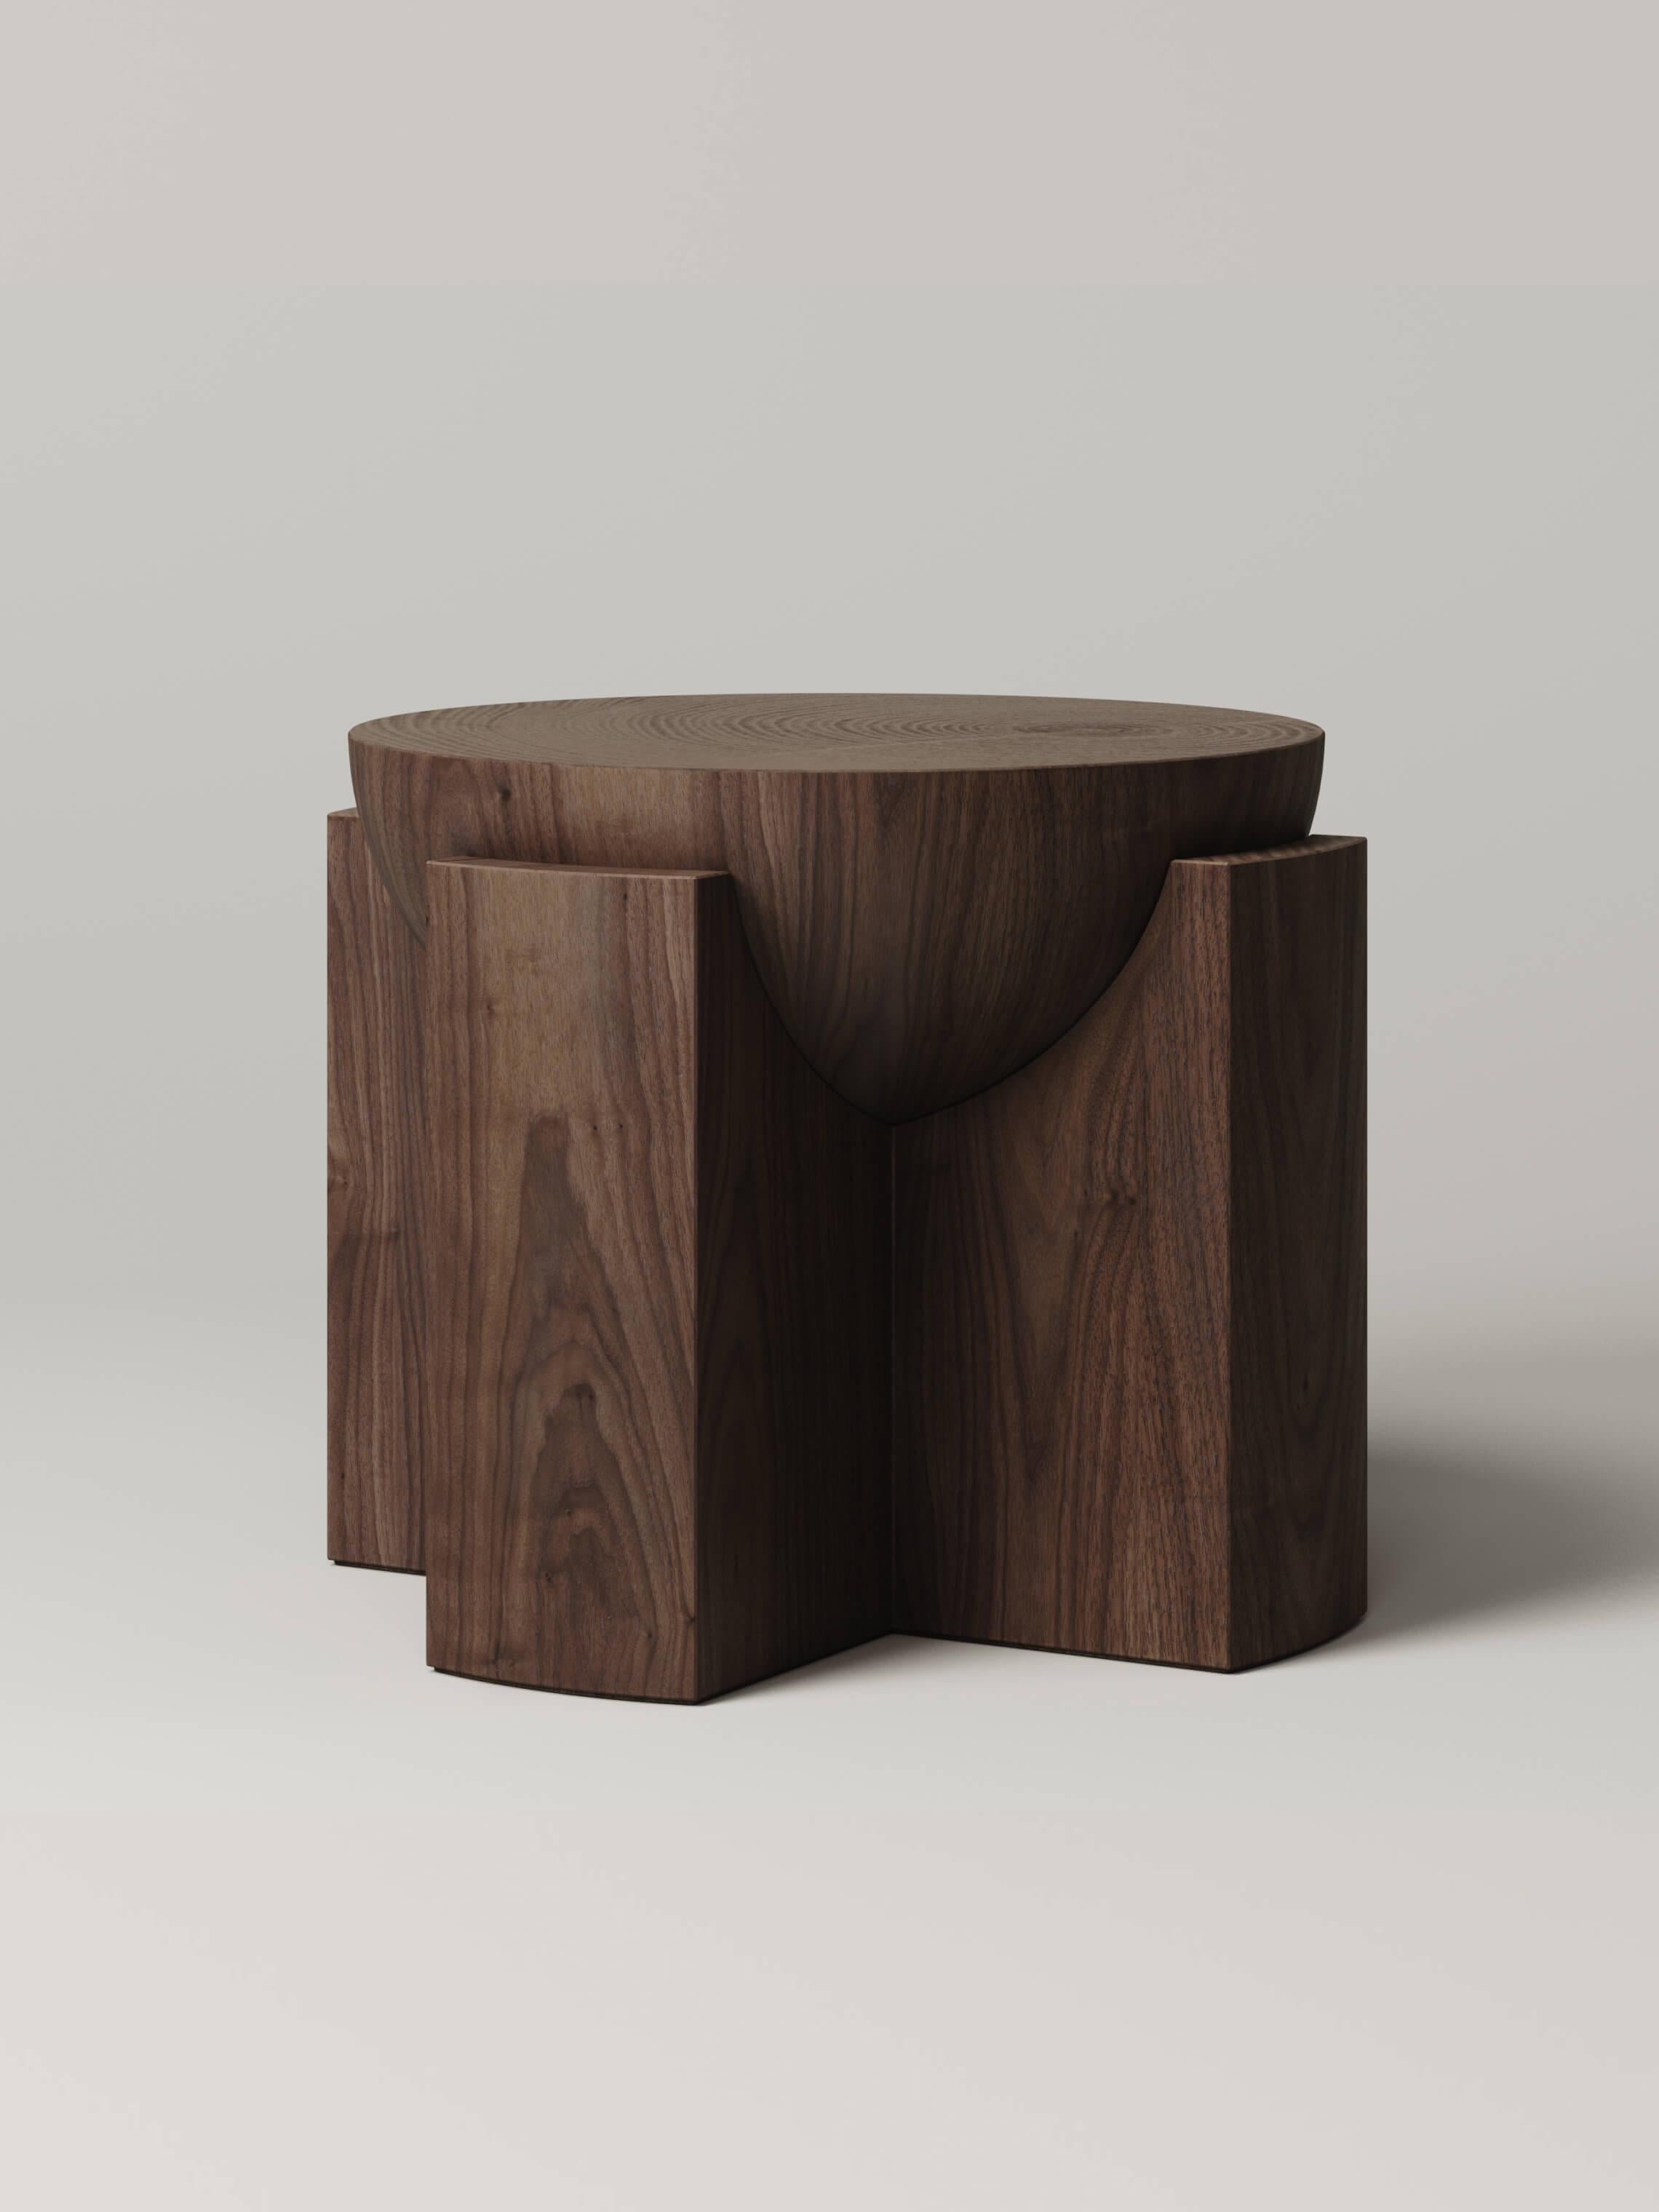 Composed of two pieces of carved walnut, the half-dome sphere of the M_003 side table floats effortlessly within its base. The sculptural and heavily proportioned form is simultaneously a functional object and a piece of art.

Designed in